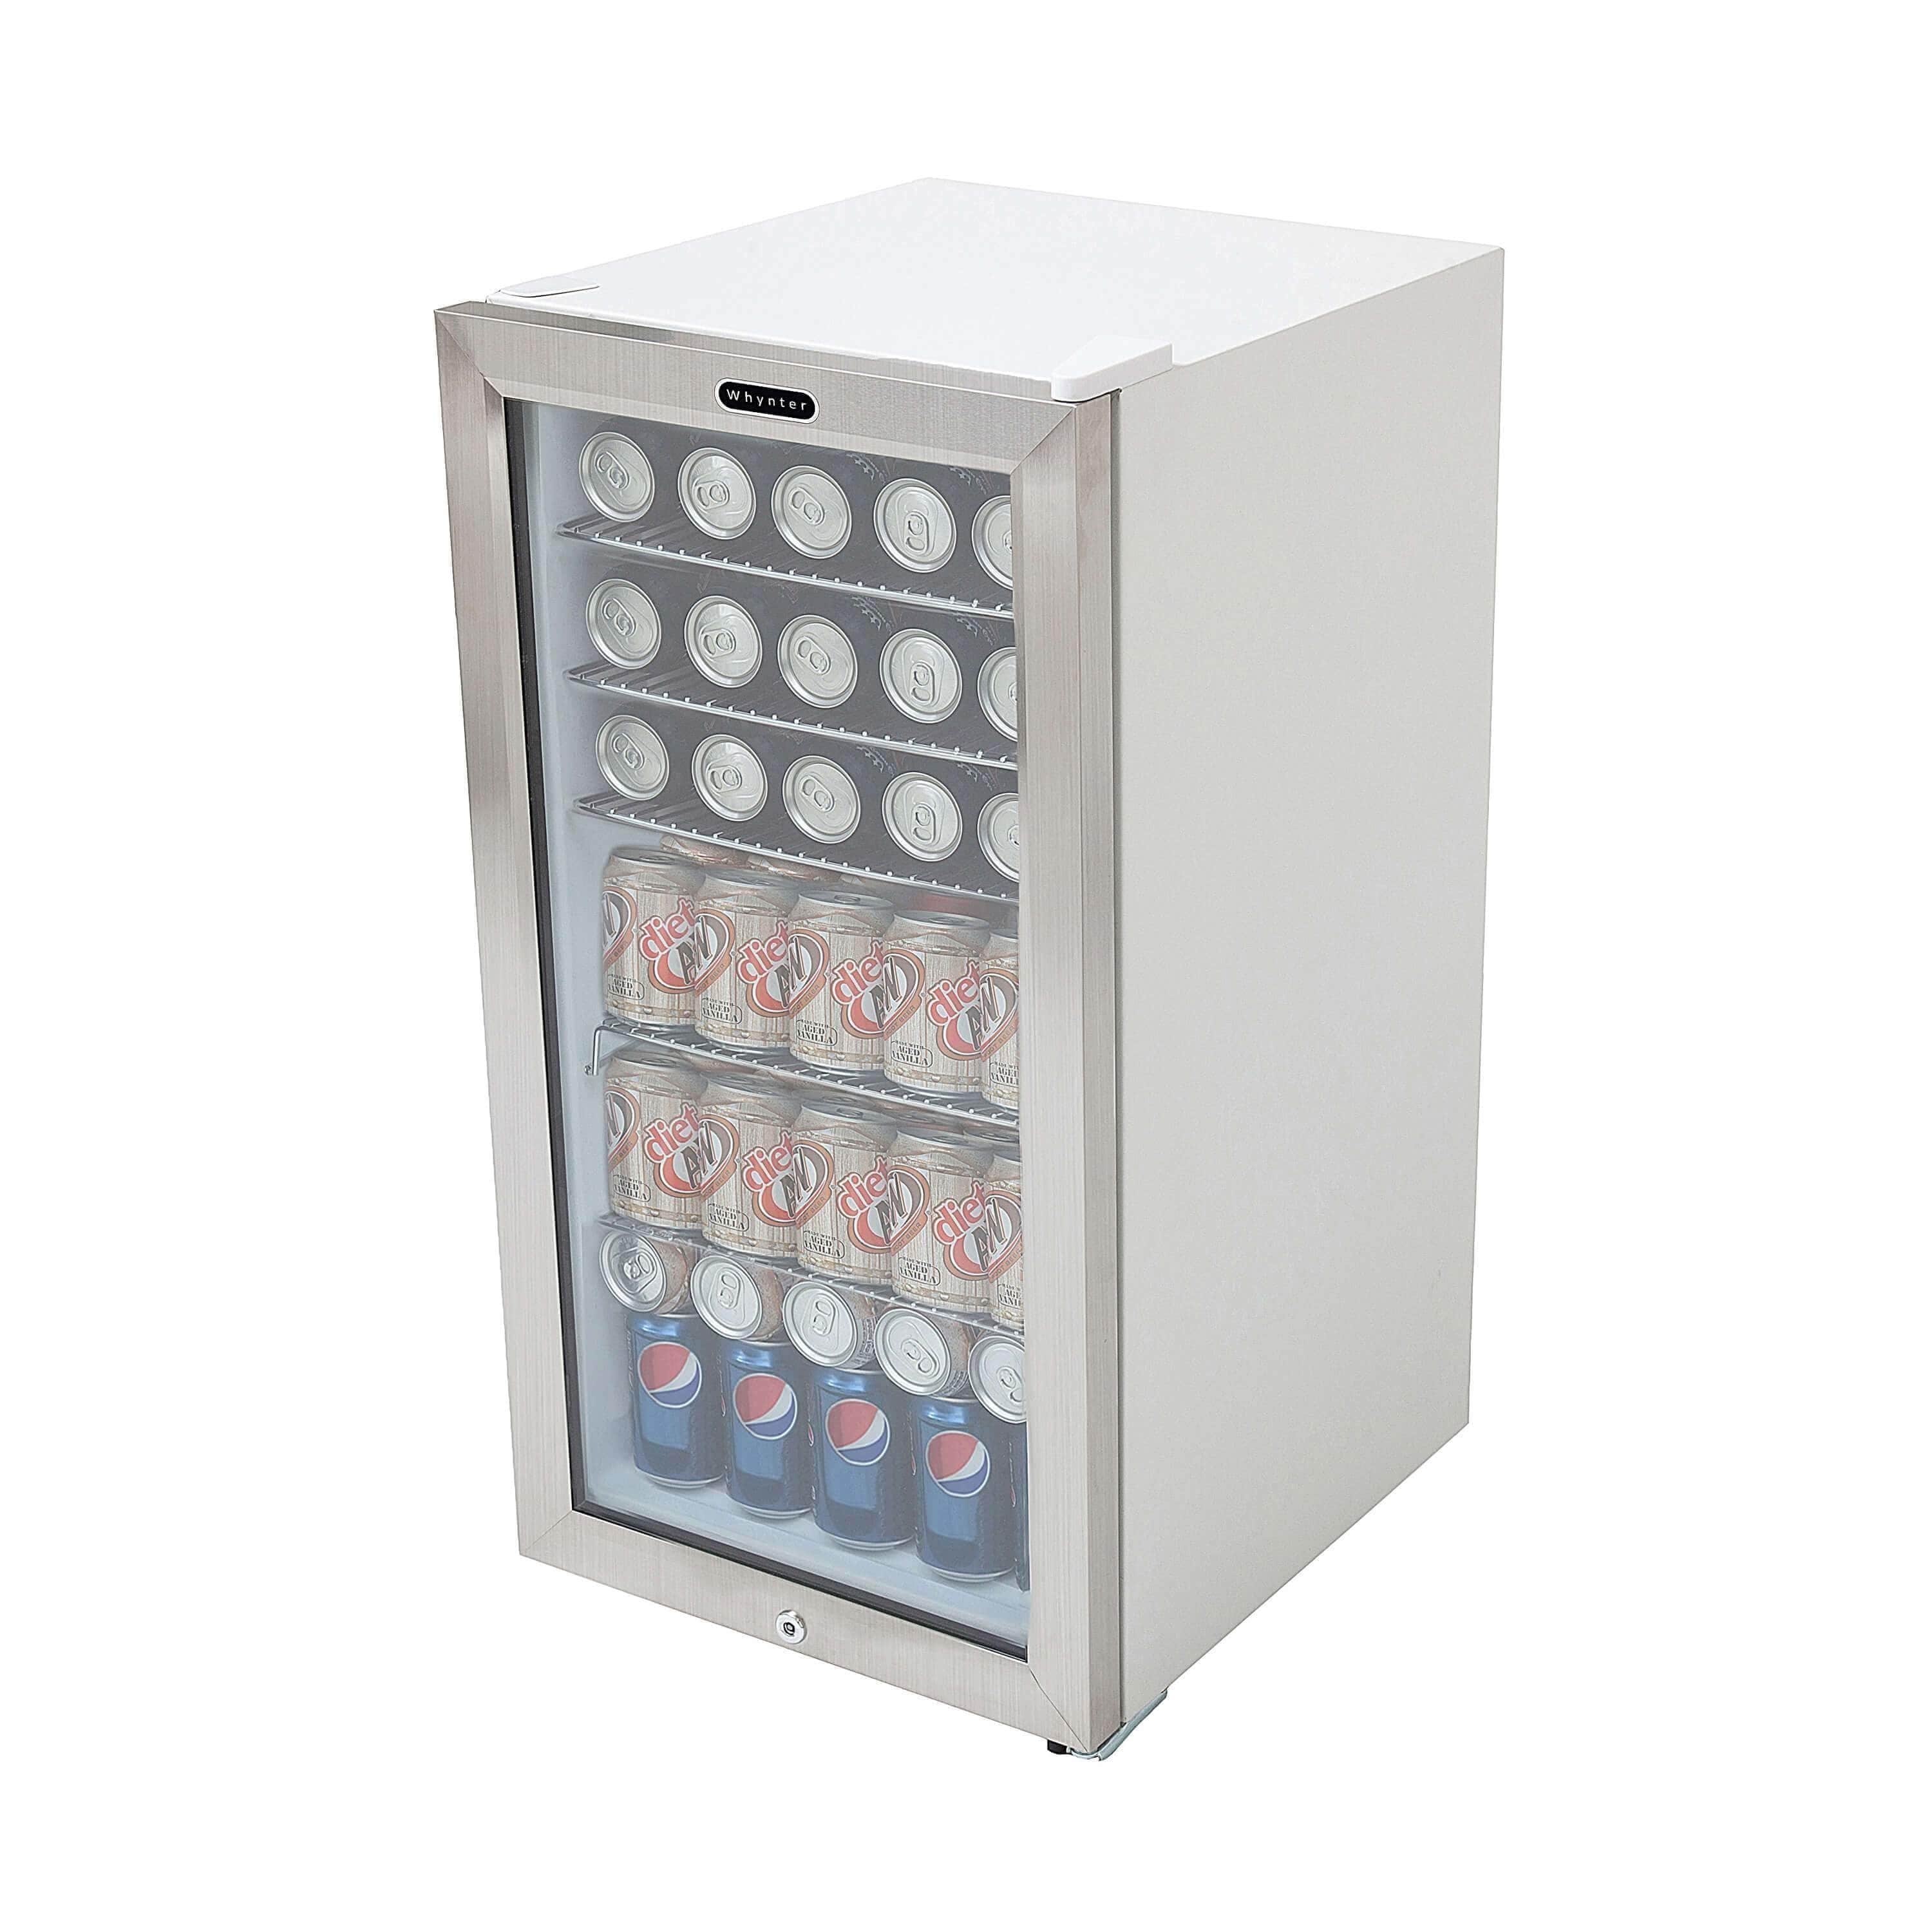 Whynter 85W Beverage Cooler, 120-Can, 115V, Stainless Steel